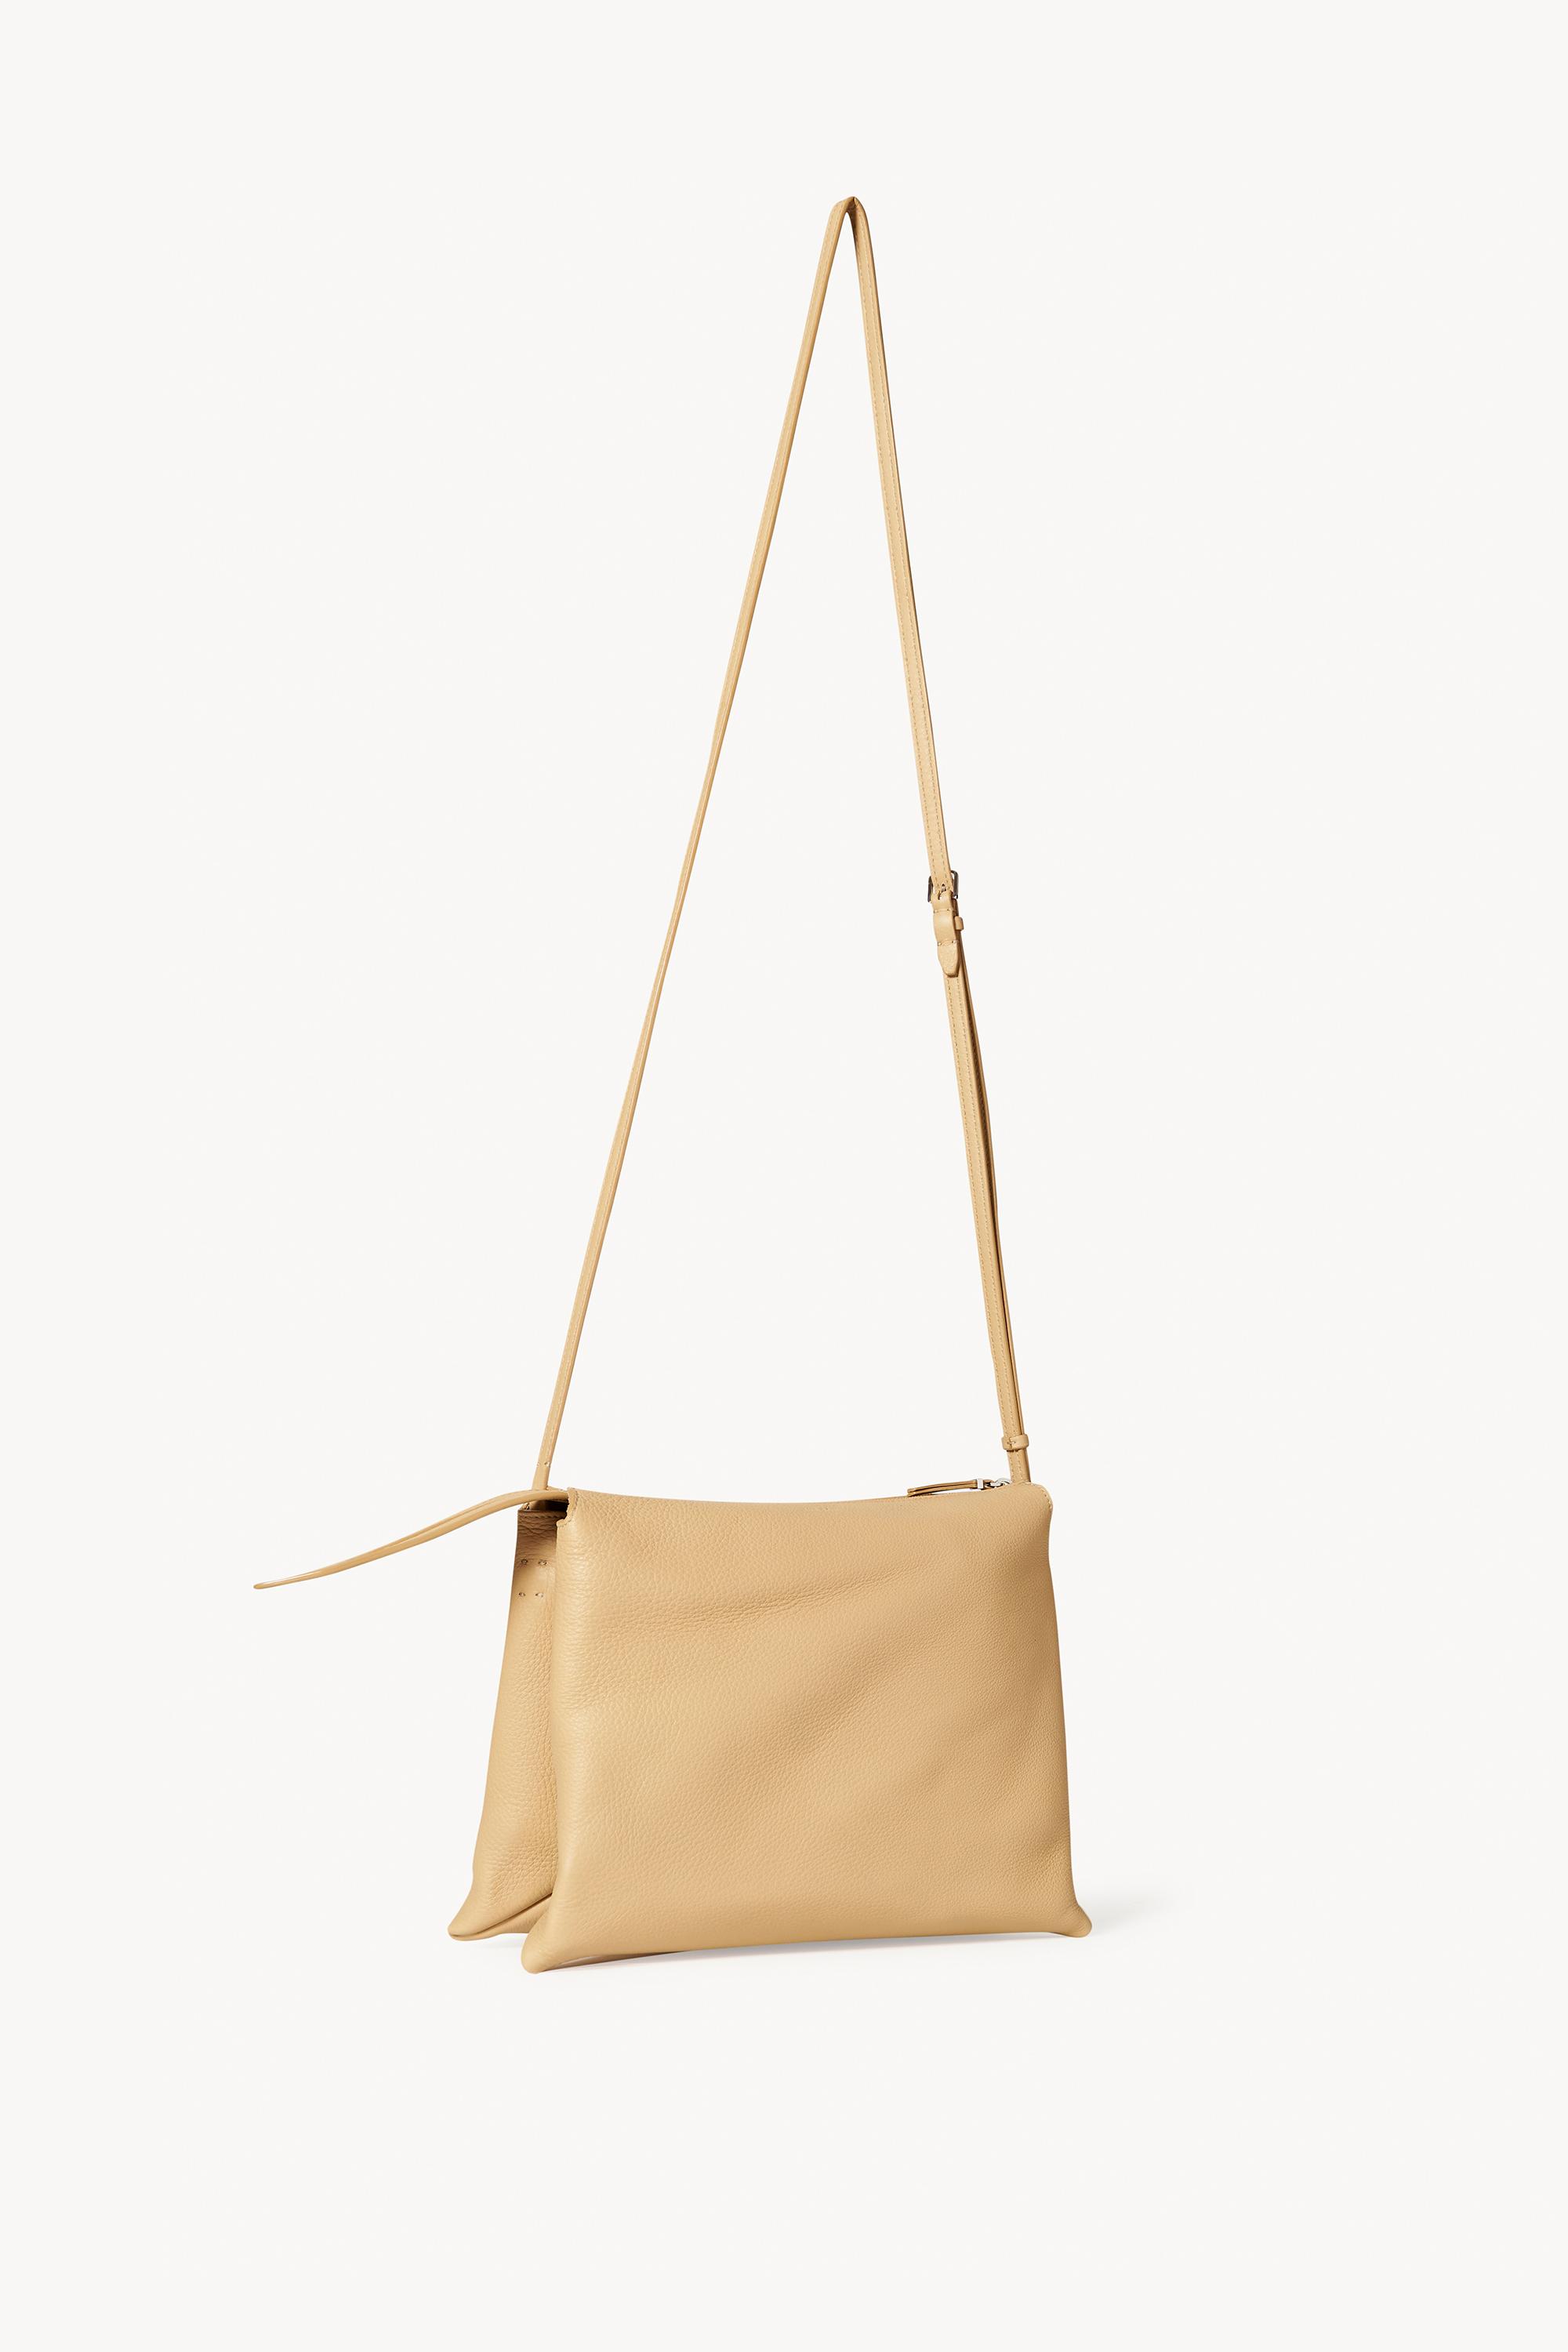 The Row Nu Twin Bag In Leather in Natural - Lyst